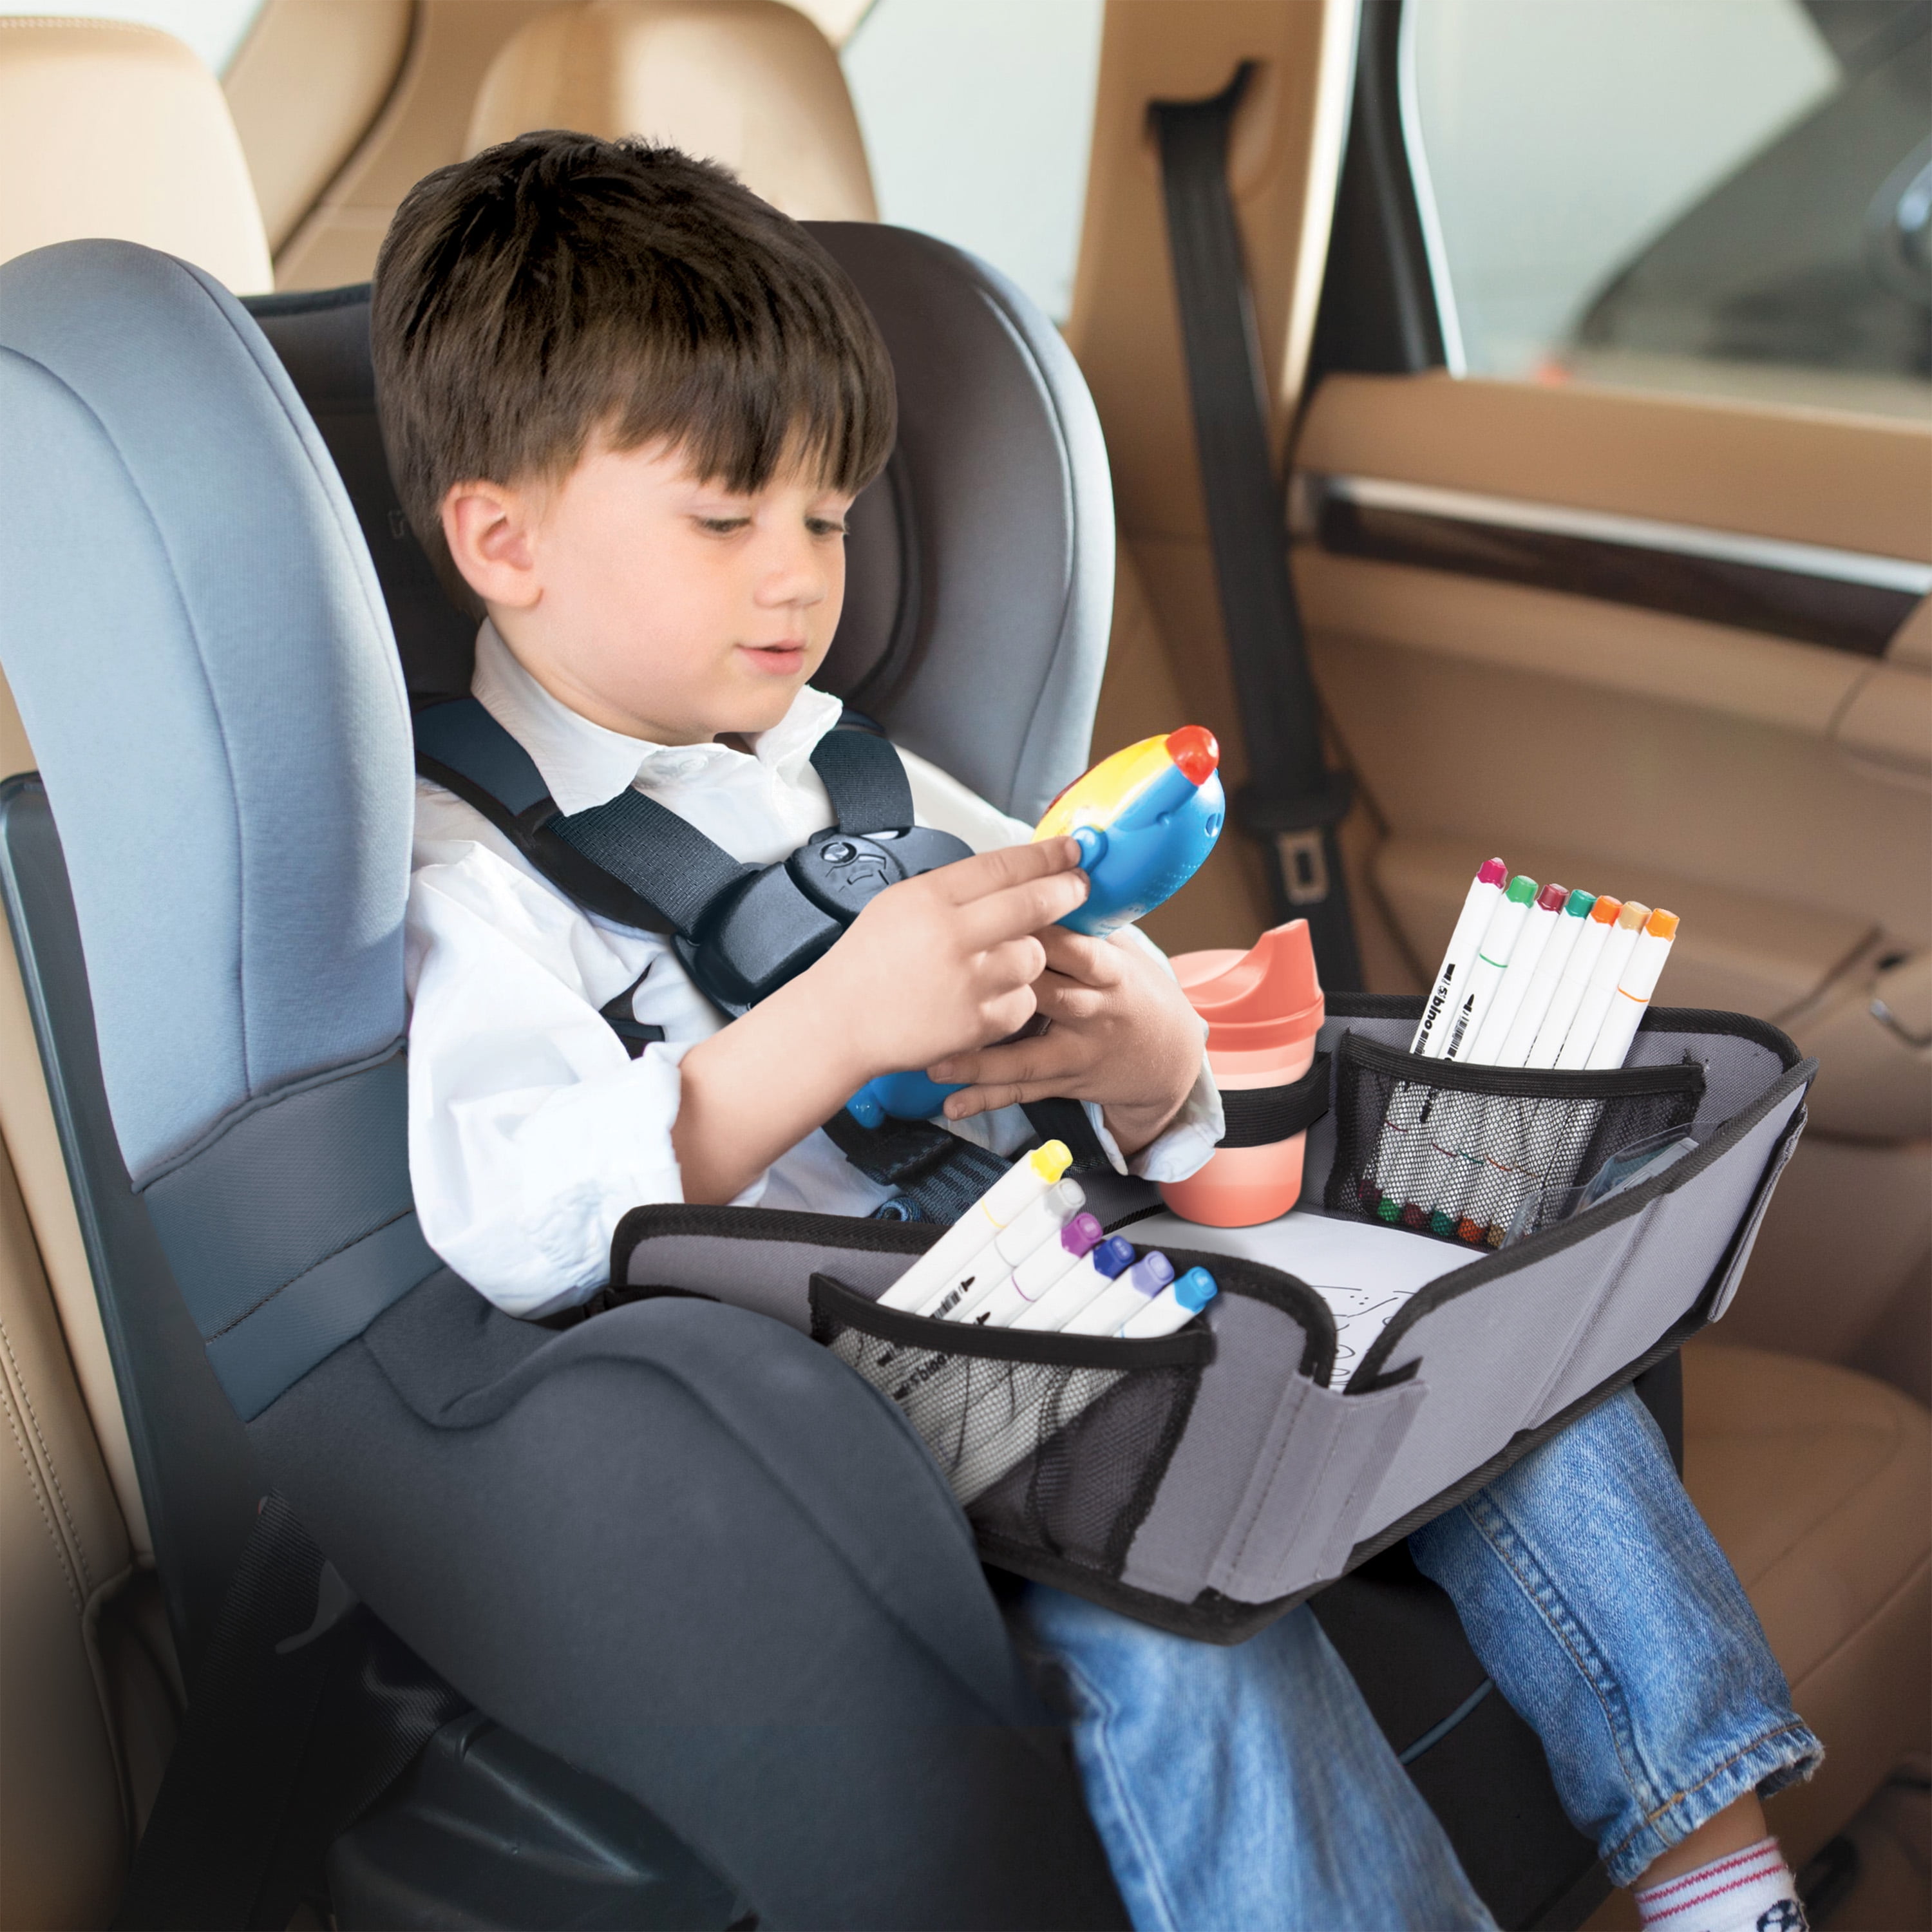 19 Baby Car Accessories When Travelling With Kids 2021